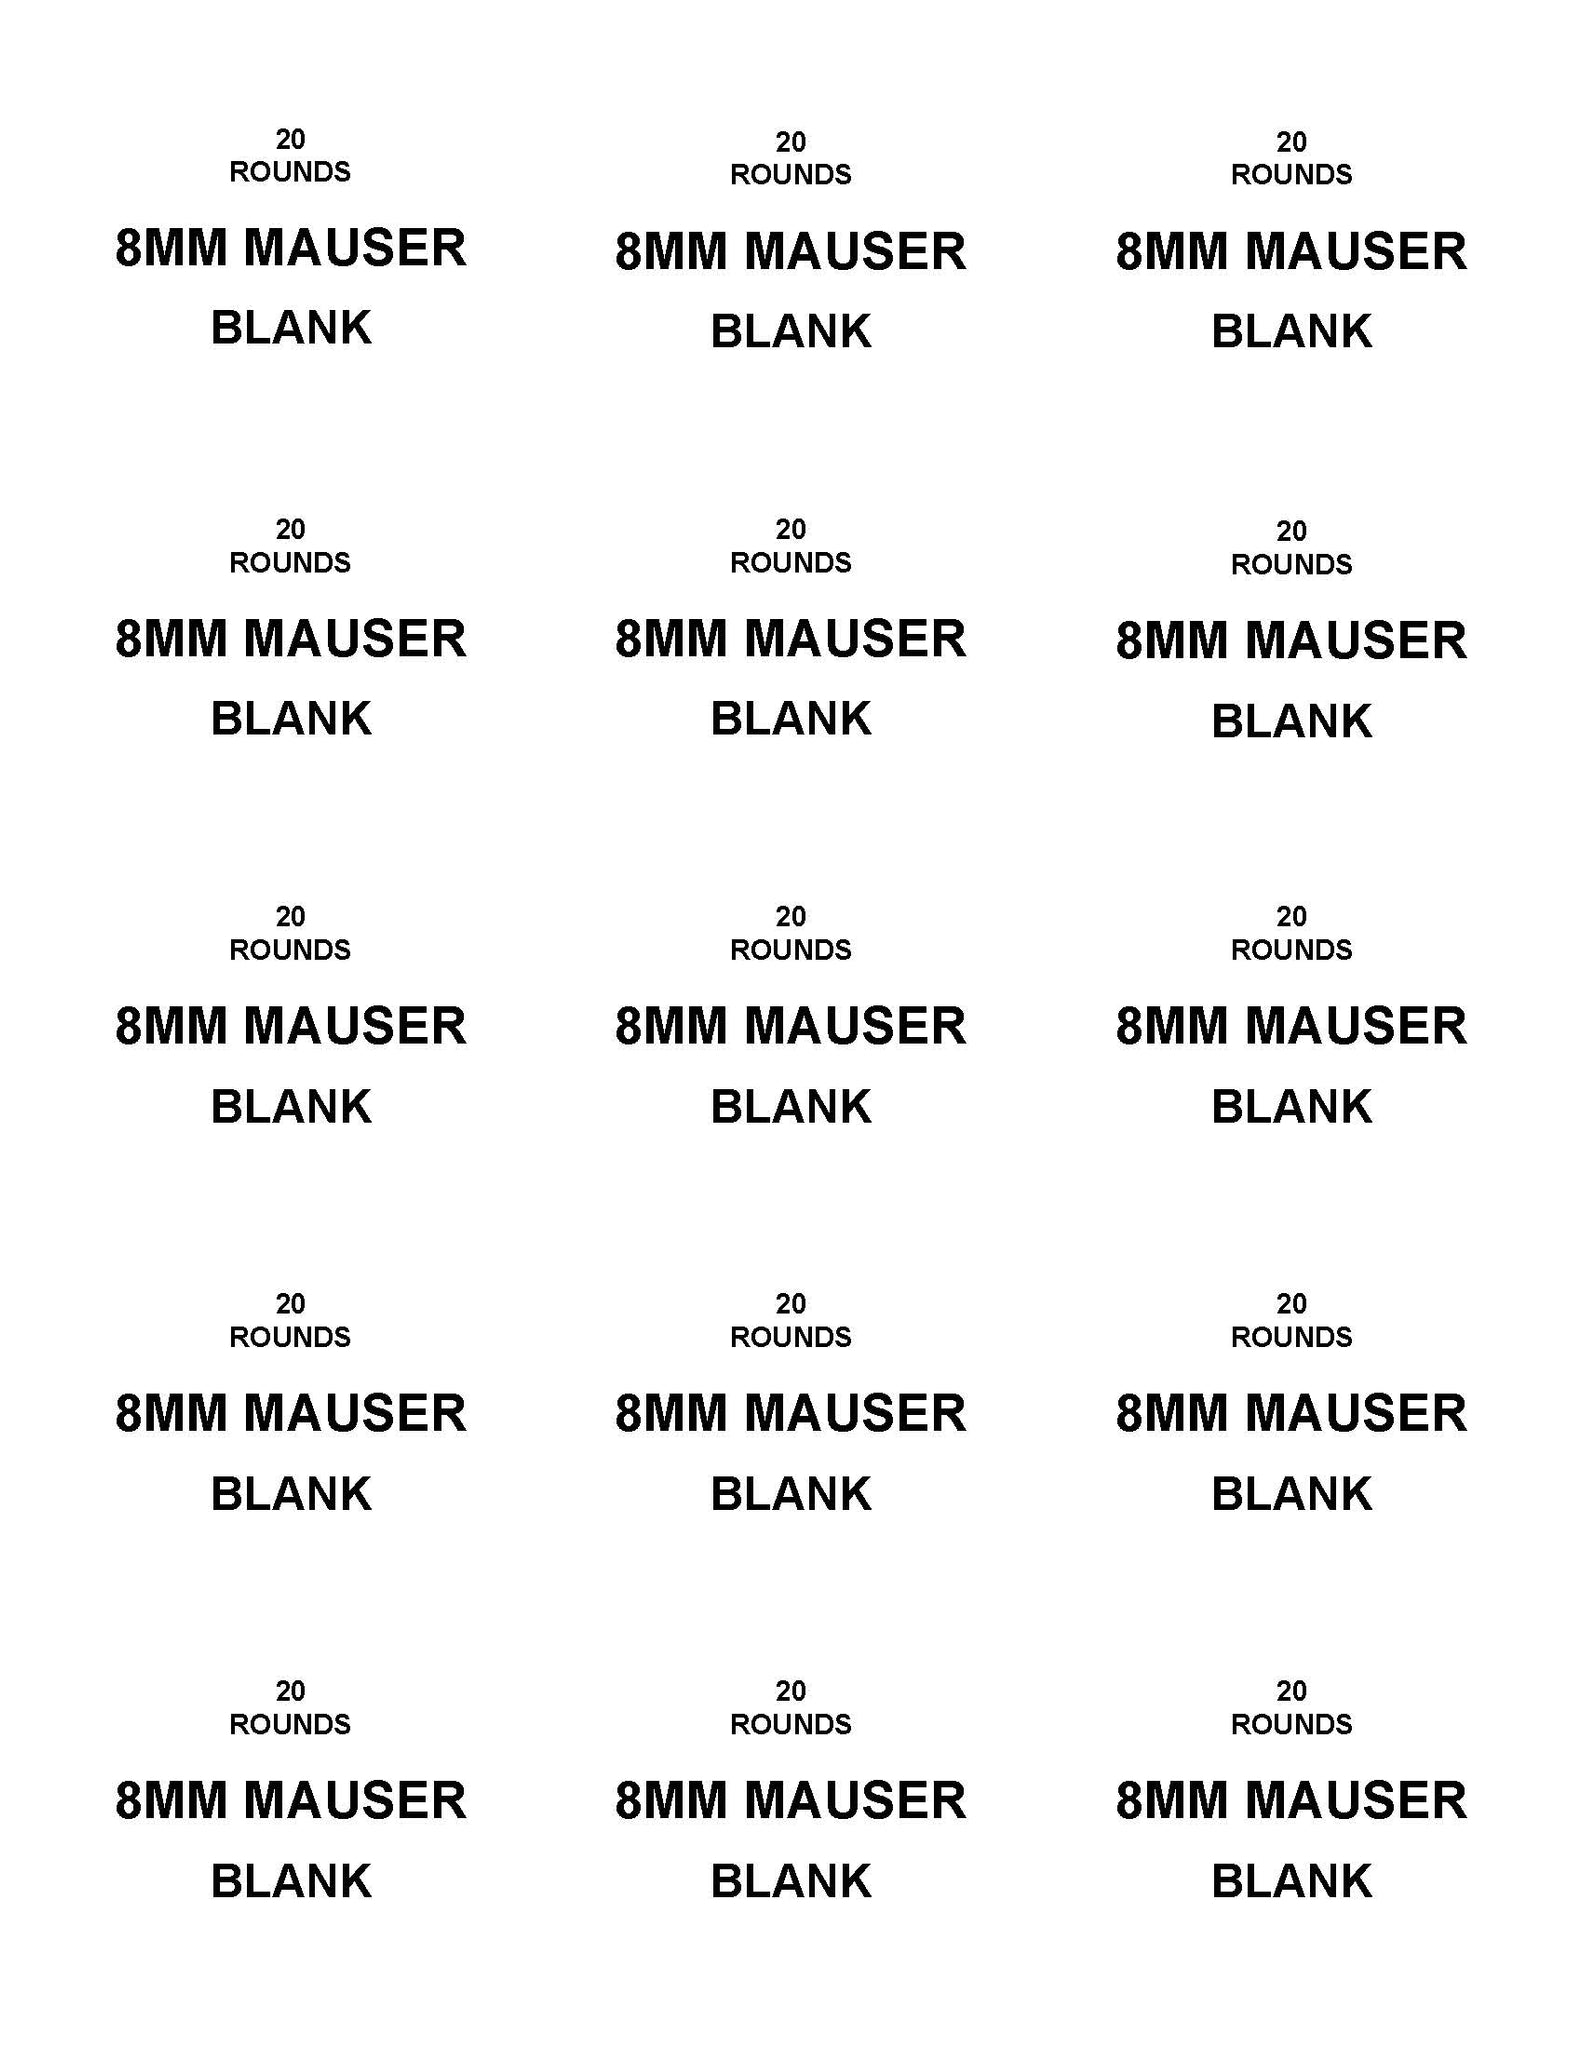 Labels: 8MM Mauser Blank